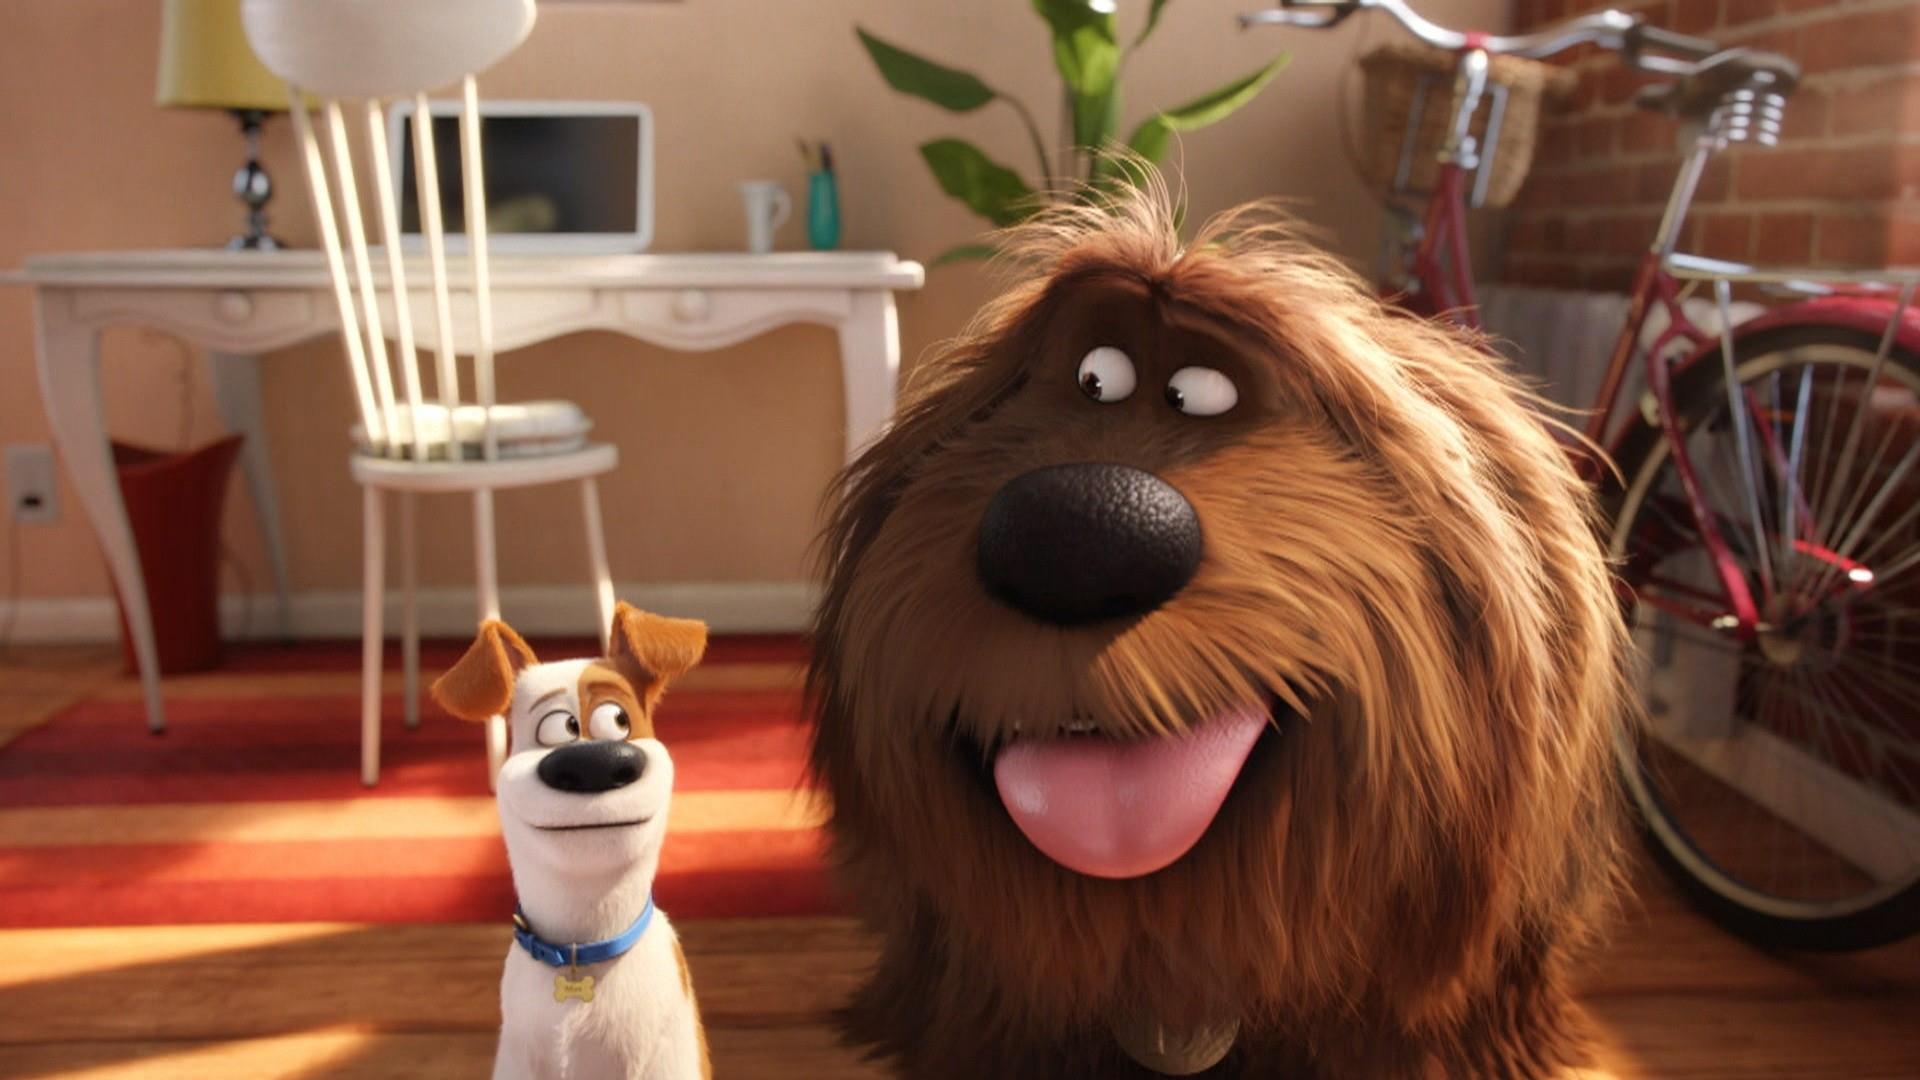 See a preview of 'The Secret Life of Pets 2'